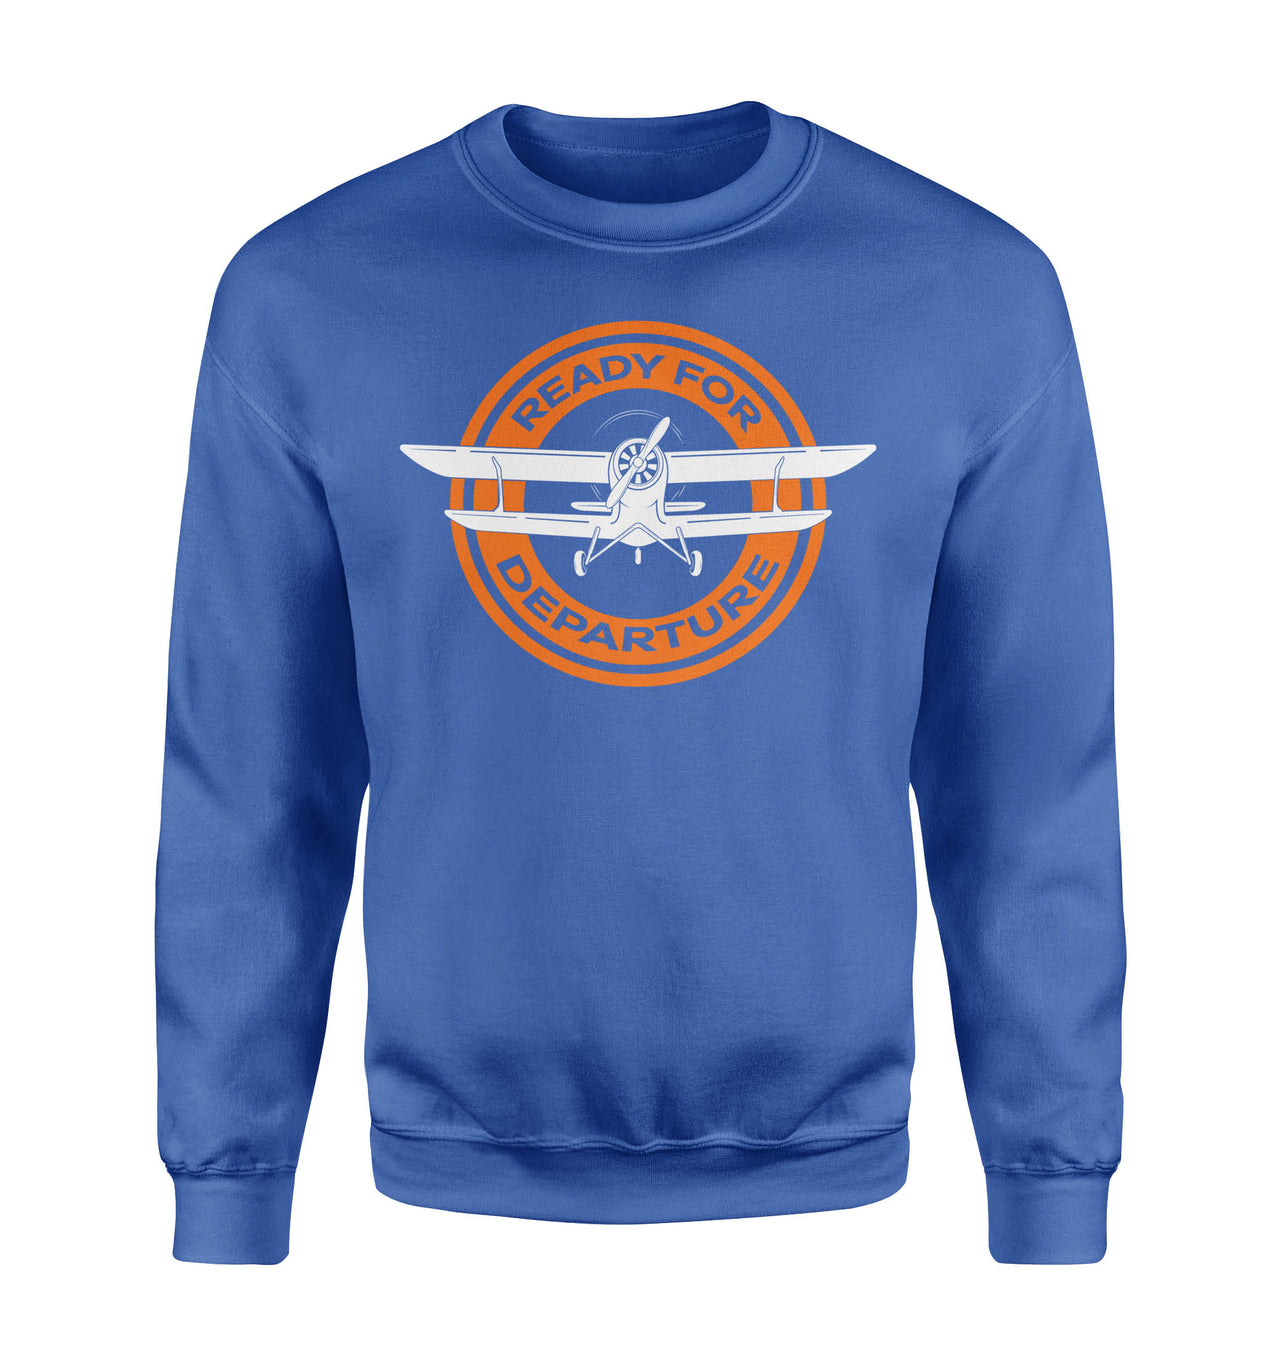 Ready for Departure Designed Sweatshirts